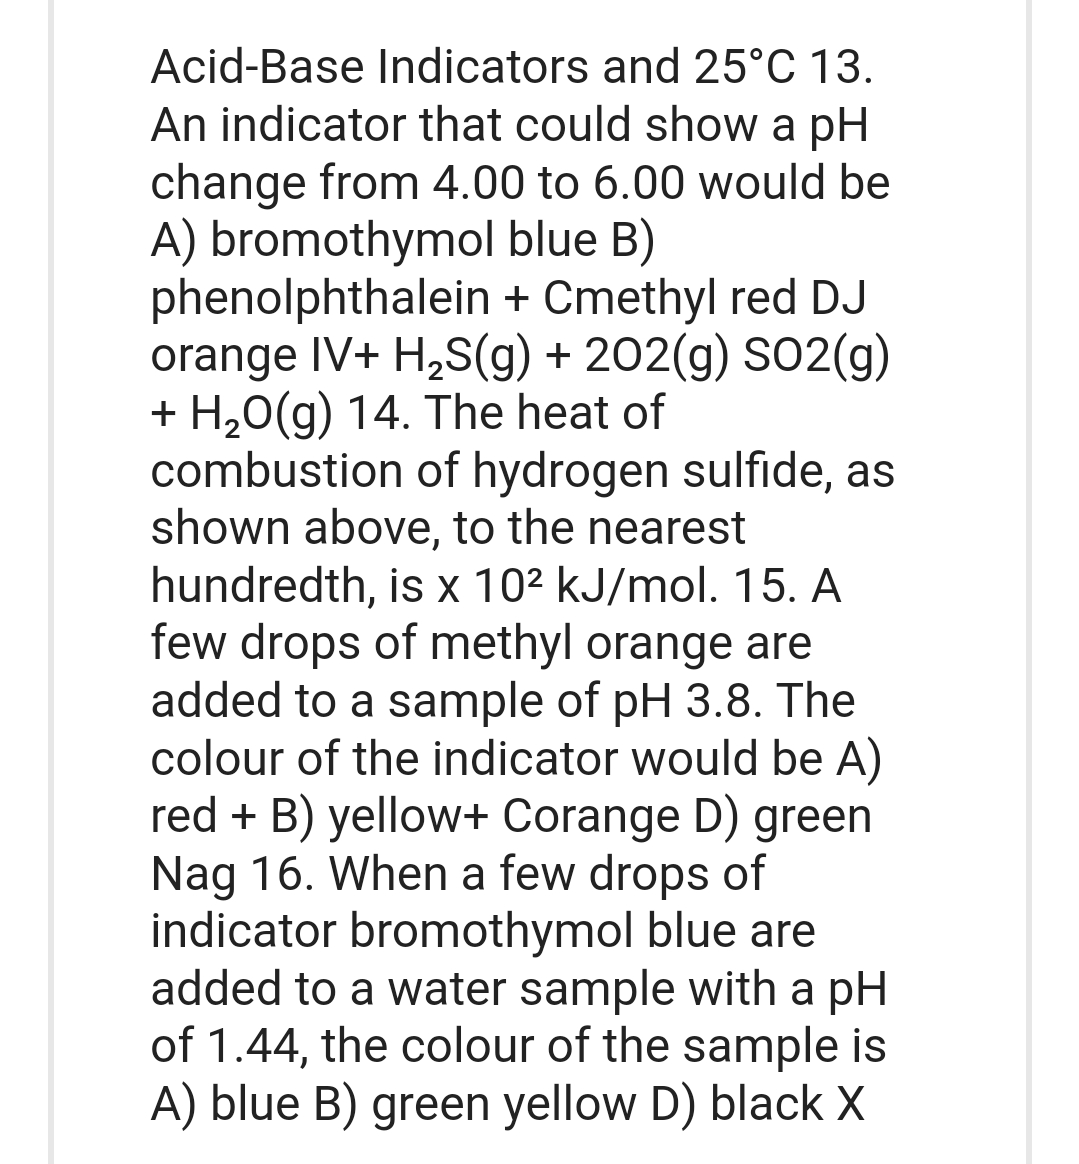 Acid-Base Indicators and 25°C 13.
An indicator that could show a pH
change from 4.00 to 6.00 would be
A) bromothymol blue B)
phenolphthalein + Cmethyl red DJ
orange IV+ H₂S(g) + 202(g) SO2(g)
+ H₂O(g) 14. The heat of
combustion of hydrogen sulfide, as
shown above, to the nearest
hundredth, is x 10² kJ/mol. 15. A
few drops of methyl orange are
added to a sample of pH 3.8. The
colour of the indicator would be A)
red + B) yellow+ Corange D) green
Nag 16. When a few drops of
indicator bromothymol blue are
added to a water sample with a pH
of 1.44, the colour of the sample is
A) blue B) green yellow D) black X